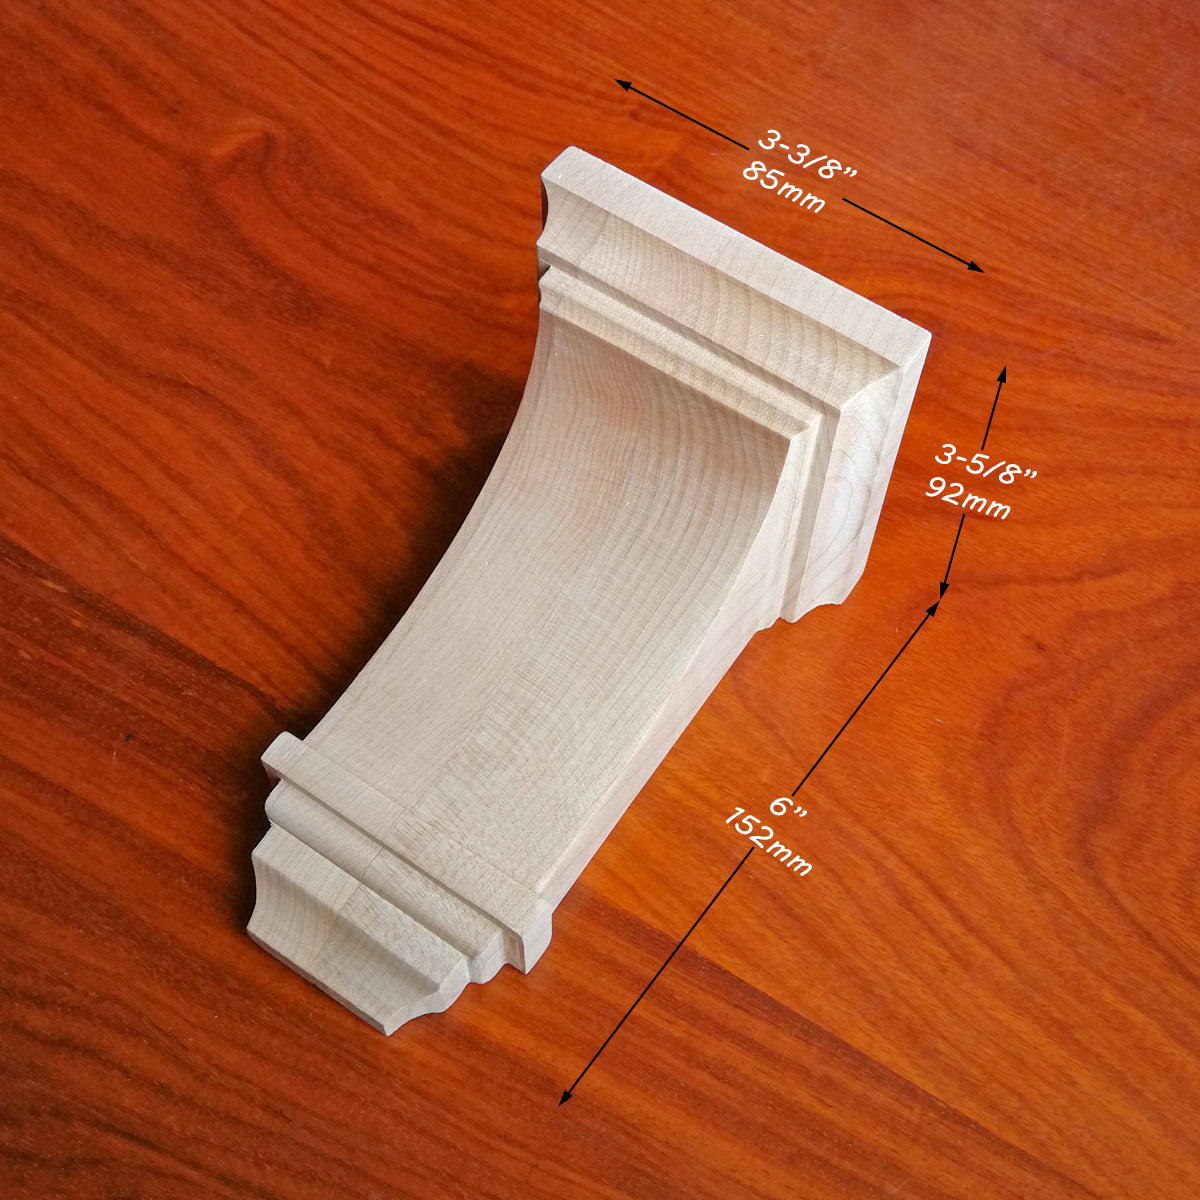 PAIR of Simple Arch Contemporary Wood Carved Bracket Corbels, Available in 6", 8", 10" & 12" High